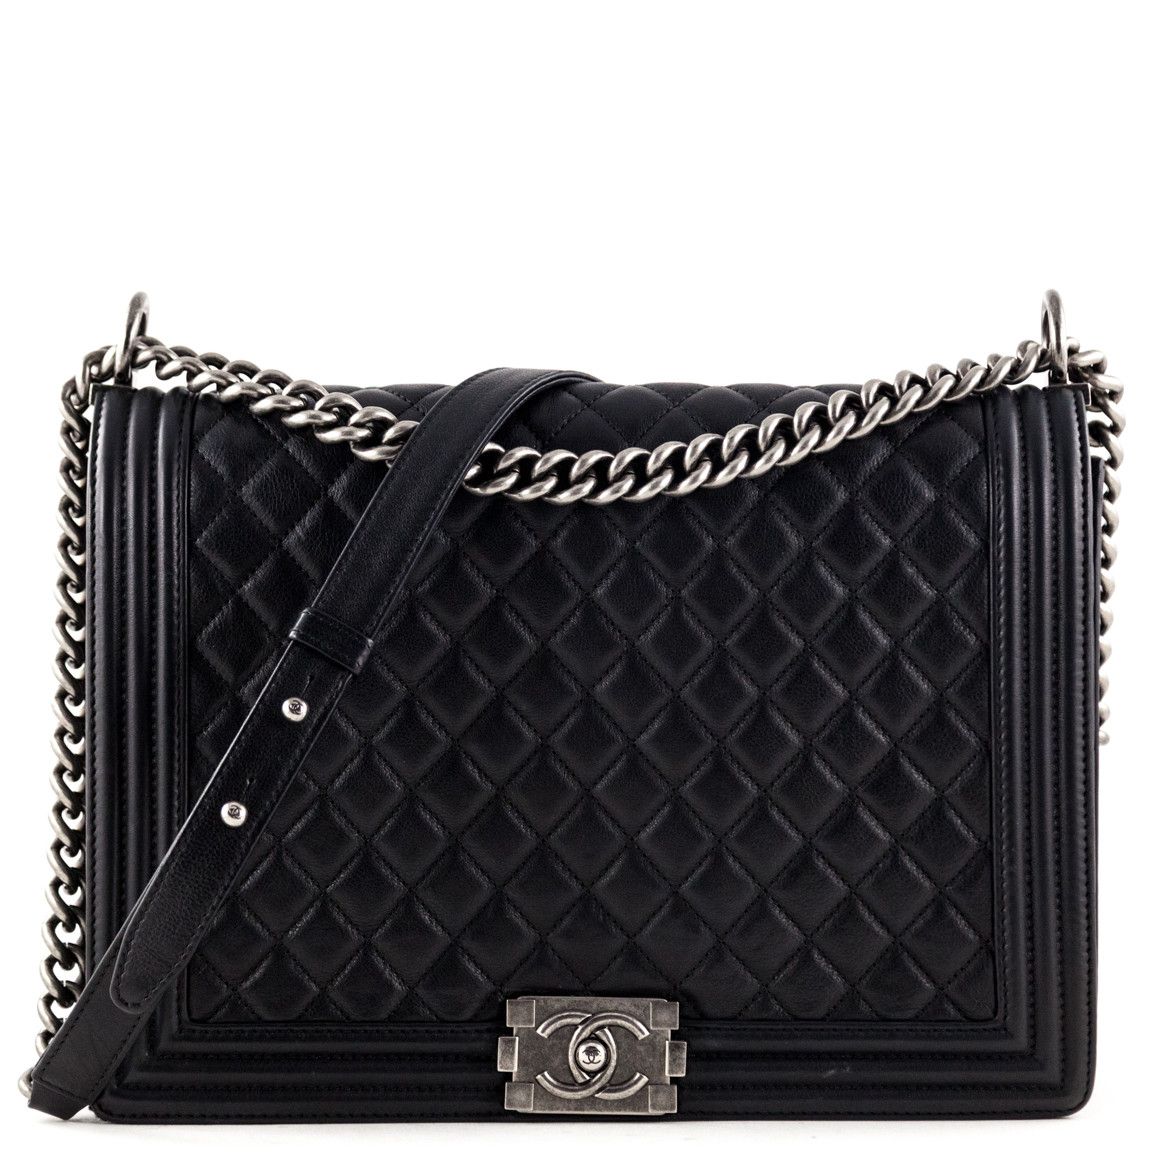 I BOUGHT MY FIRST CHANEL BAG! — WOAHSTYLE